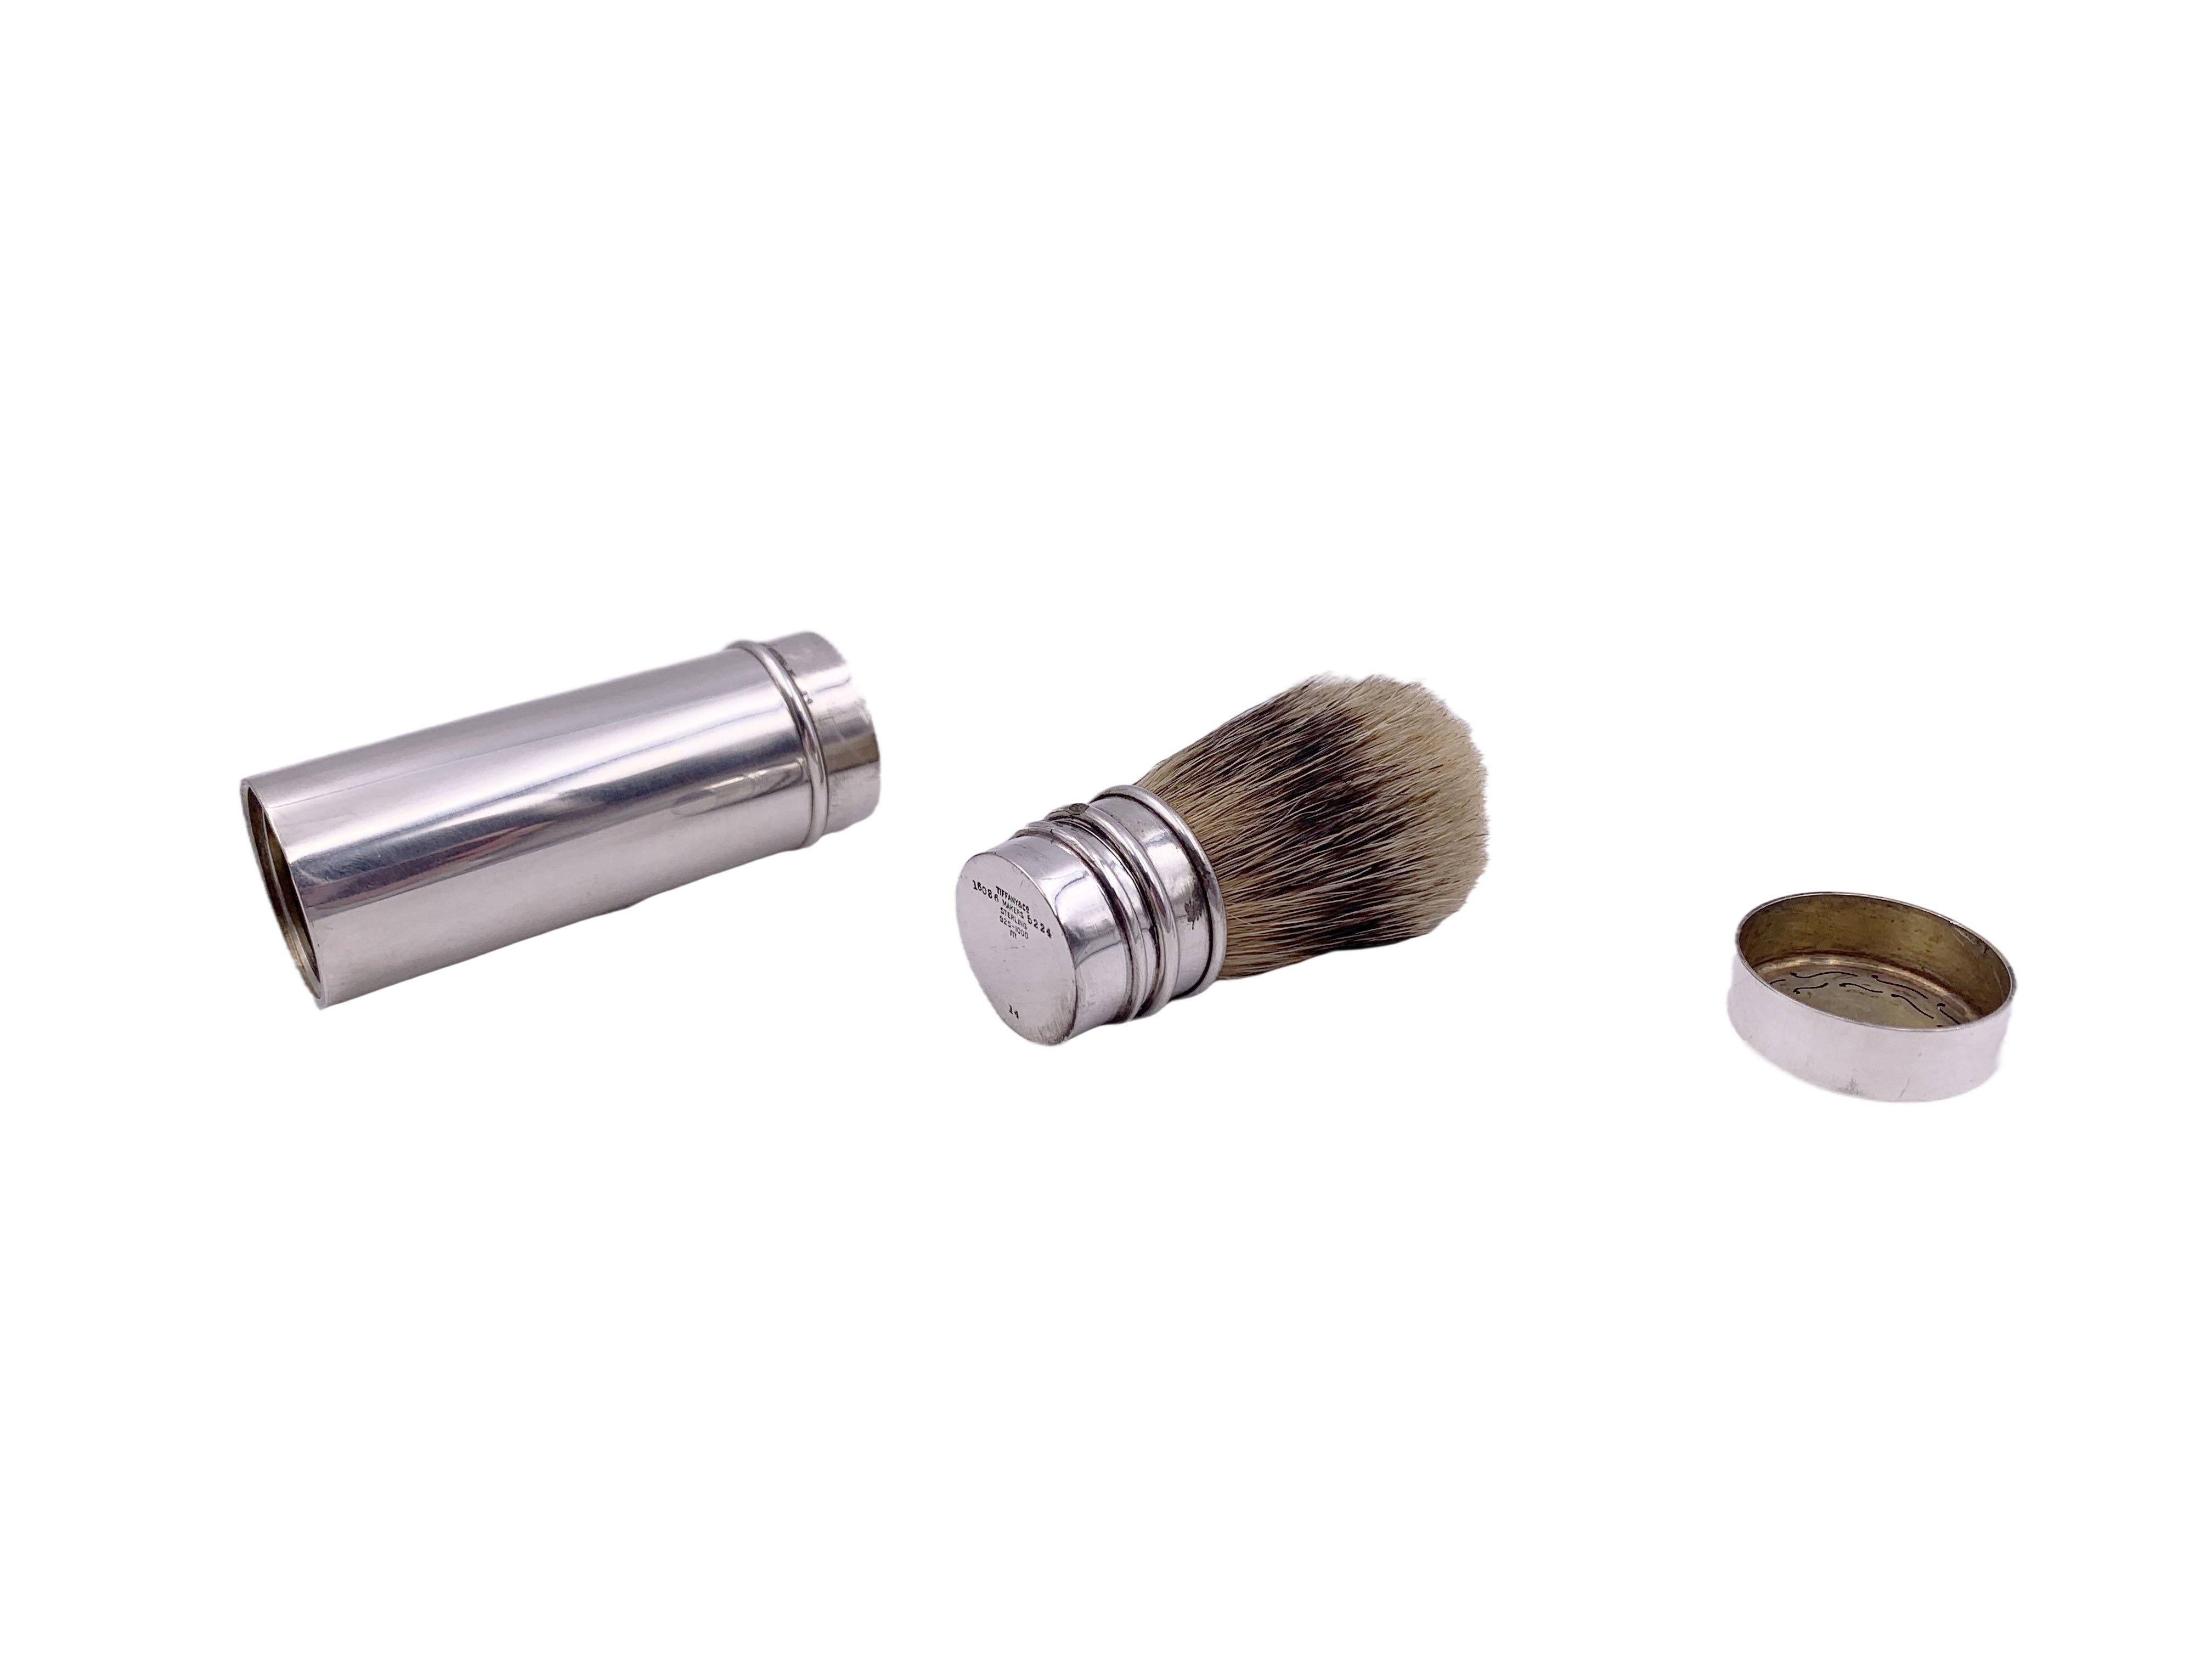 Tiffany & Co. Art Deco sterling silver, late 19th/ early 20th century 3-piece grooming set consisting of:

a box with a razor and other shaving utensils and which is gilt inside. It measures 2 1/8'' in length by 1 1/8'' in width. 
a lather brush